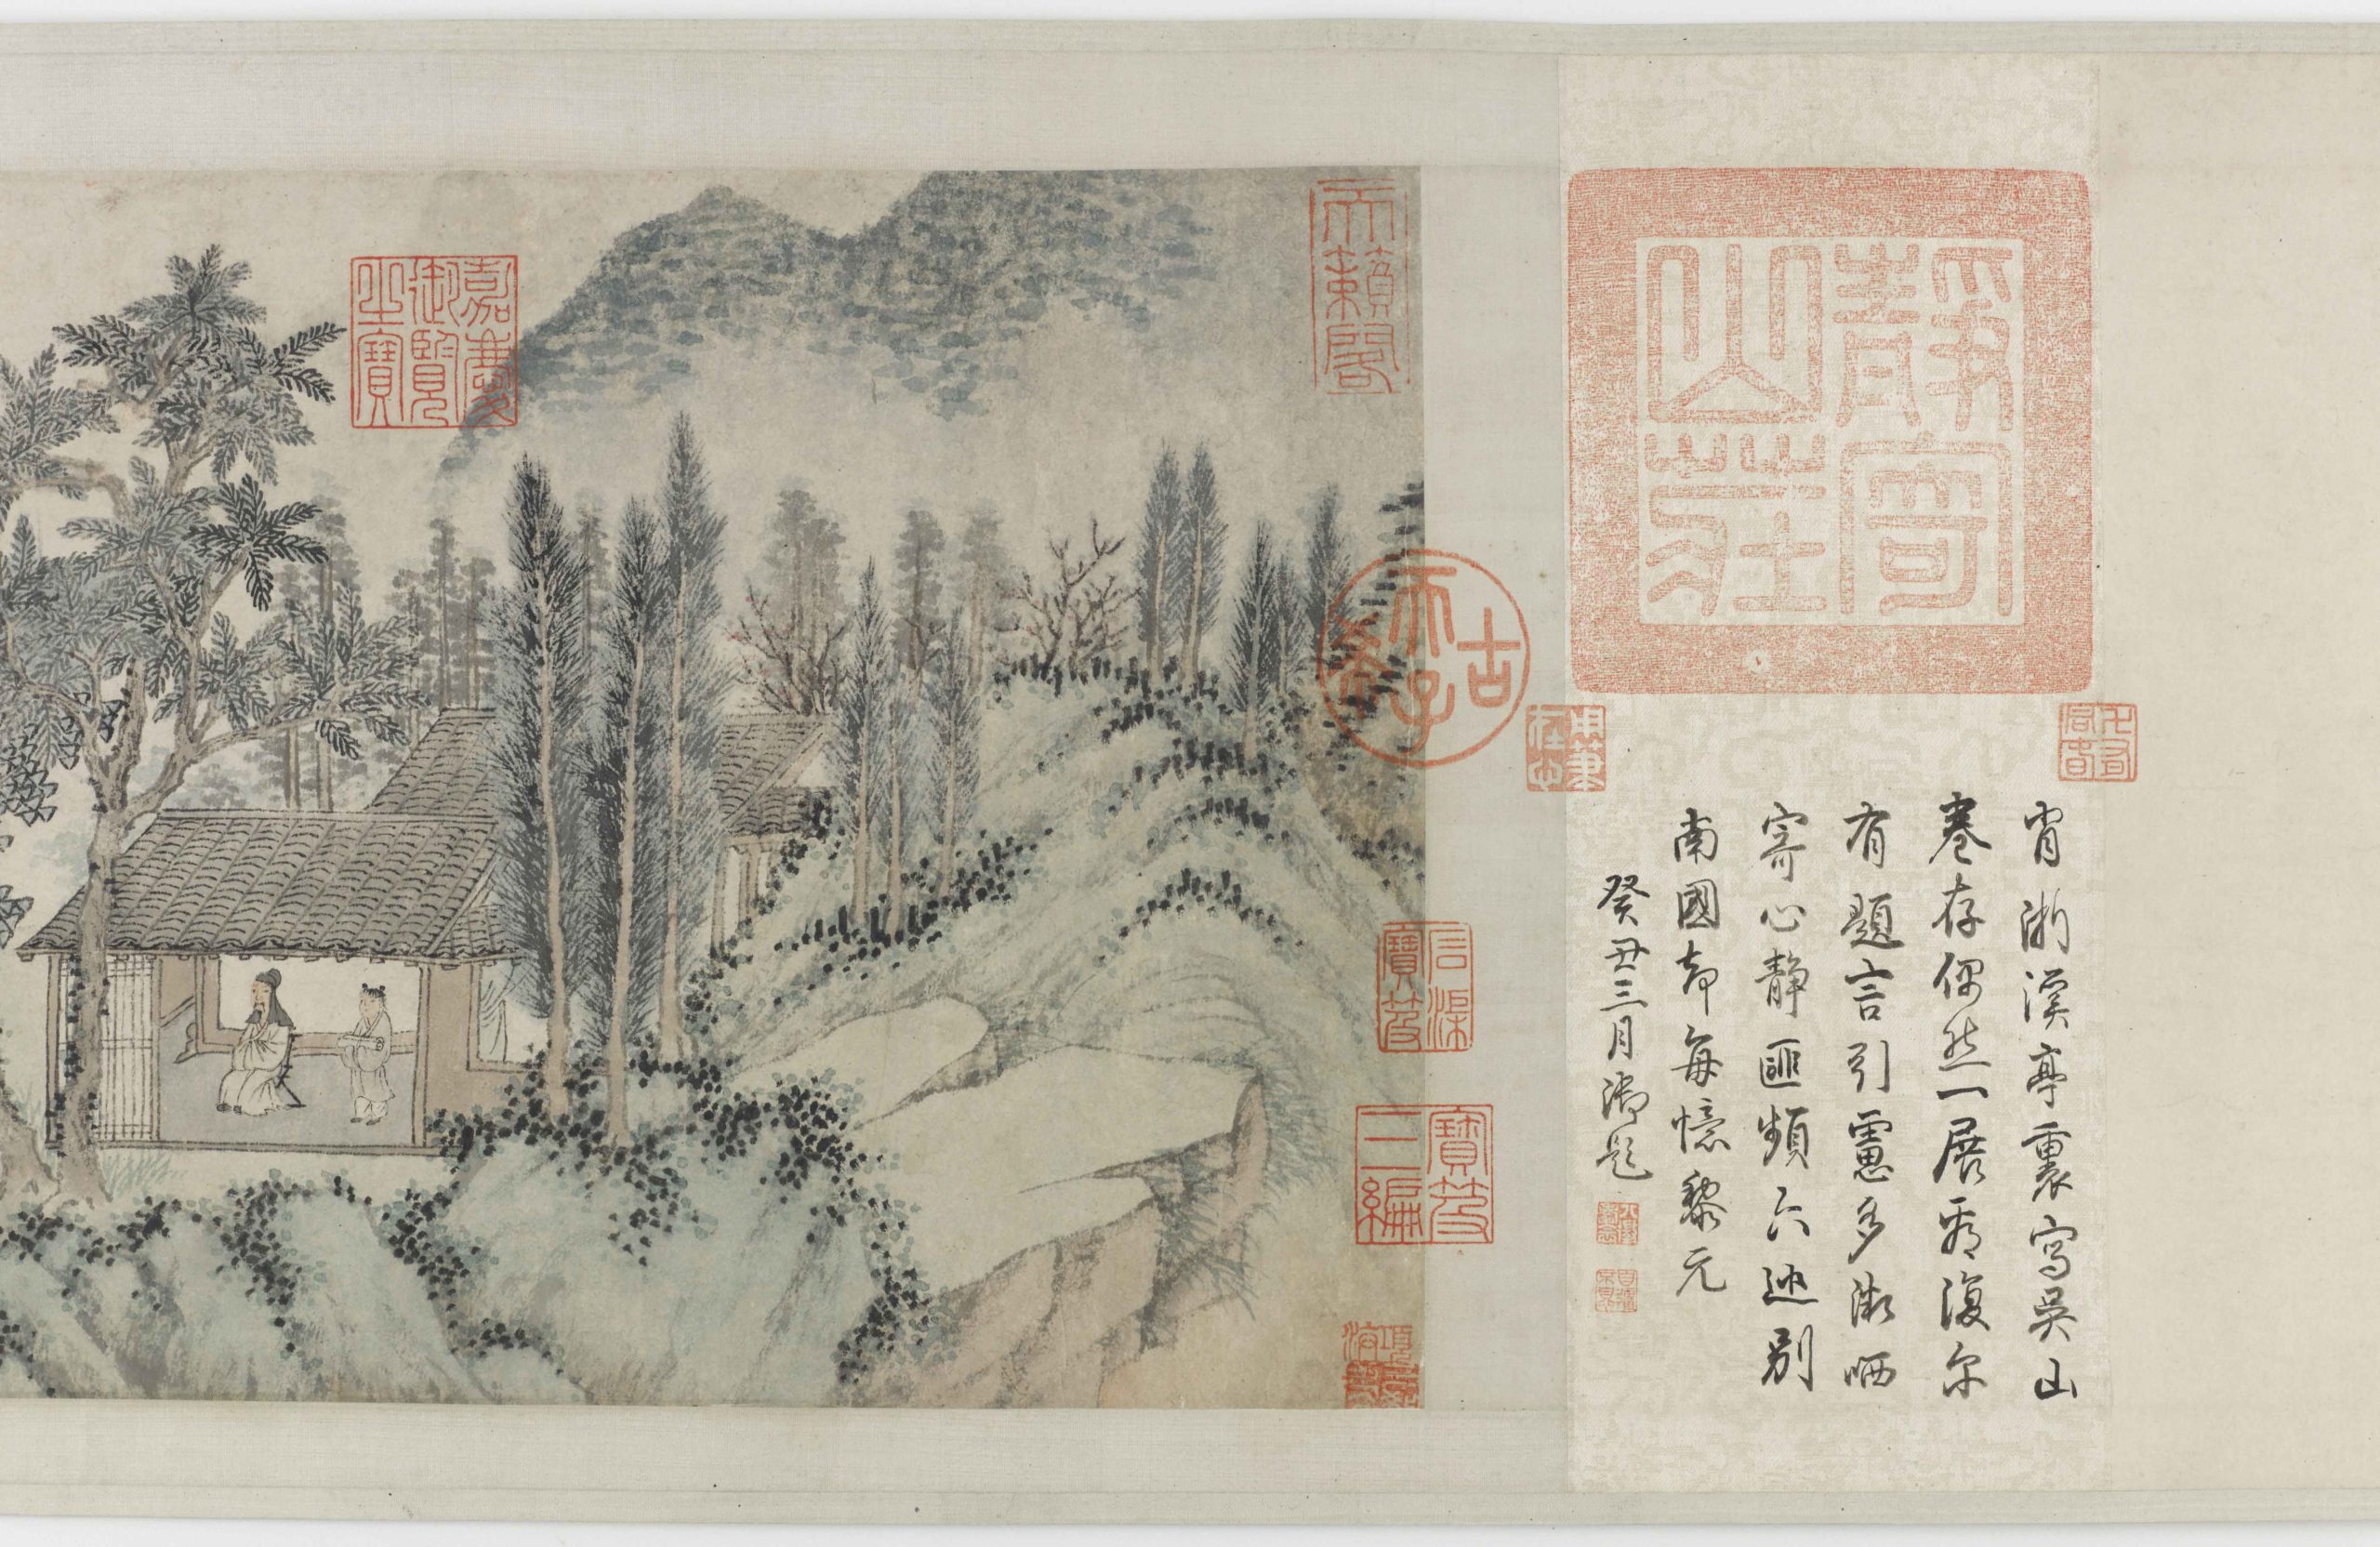 Shen Zhou 沈周 (1427–1509), A Spring Gathering, attached calligraphy by Shen Zhou 沈周 (1427-1509), frontispiece by Hongli, the Qianlong emperor (1711-1799, reigned 1735-1796), inscription on front mounting by Hongli, the Qianlong emperor (1711-1799, reigned 1735-1796), three inscriptions on painting by Hongli, the Qianlong emperor (1711-1799, reigned 1735-1796), colophon by Wen Zhengming 文徵明 (1470-1559), Ming dynasty, c. 1480?, Wu School, ink and color on paper, China, 26.5 x 131.1 cm (Freer Gallery of Art, Smithsonian Institution, Washington, DC: Purchase — Charles Lang Freer Endowment, F1934.1)